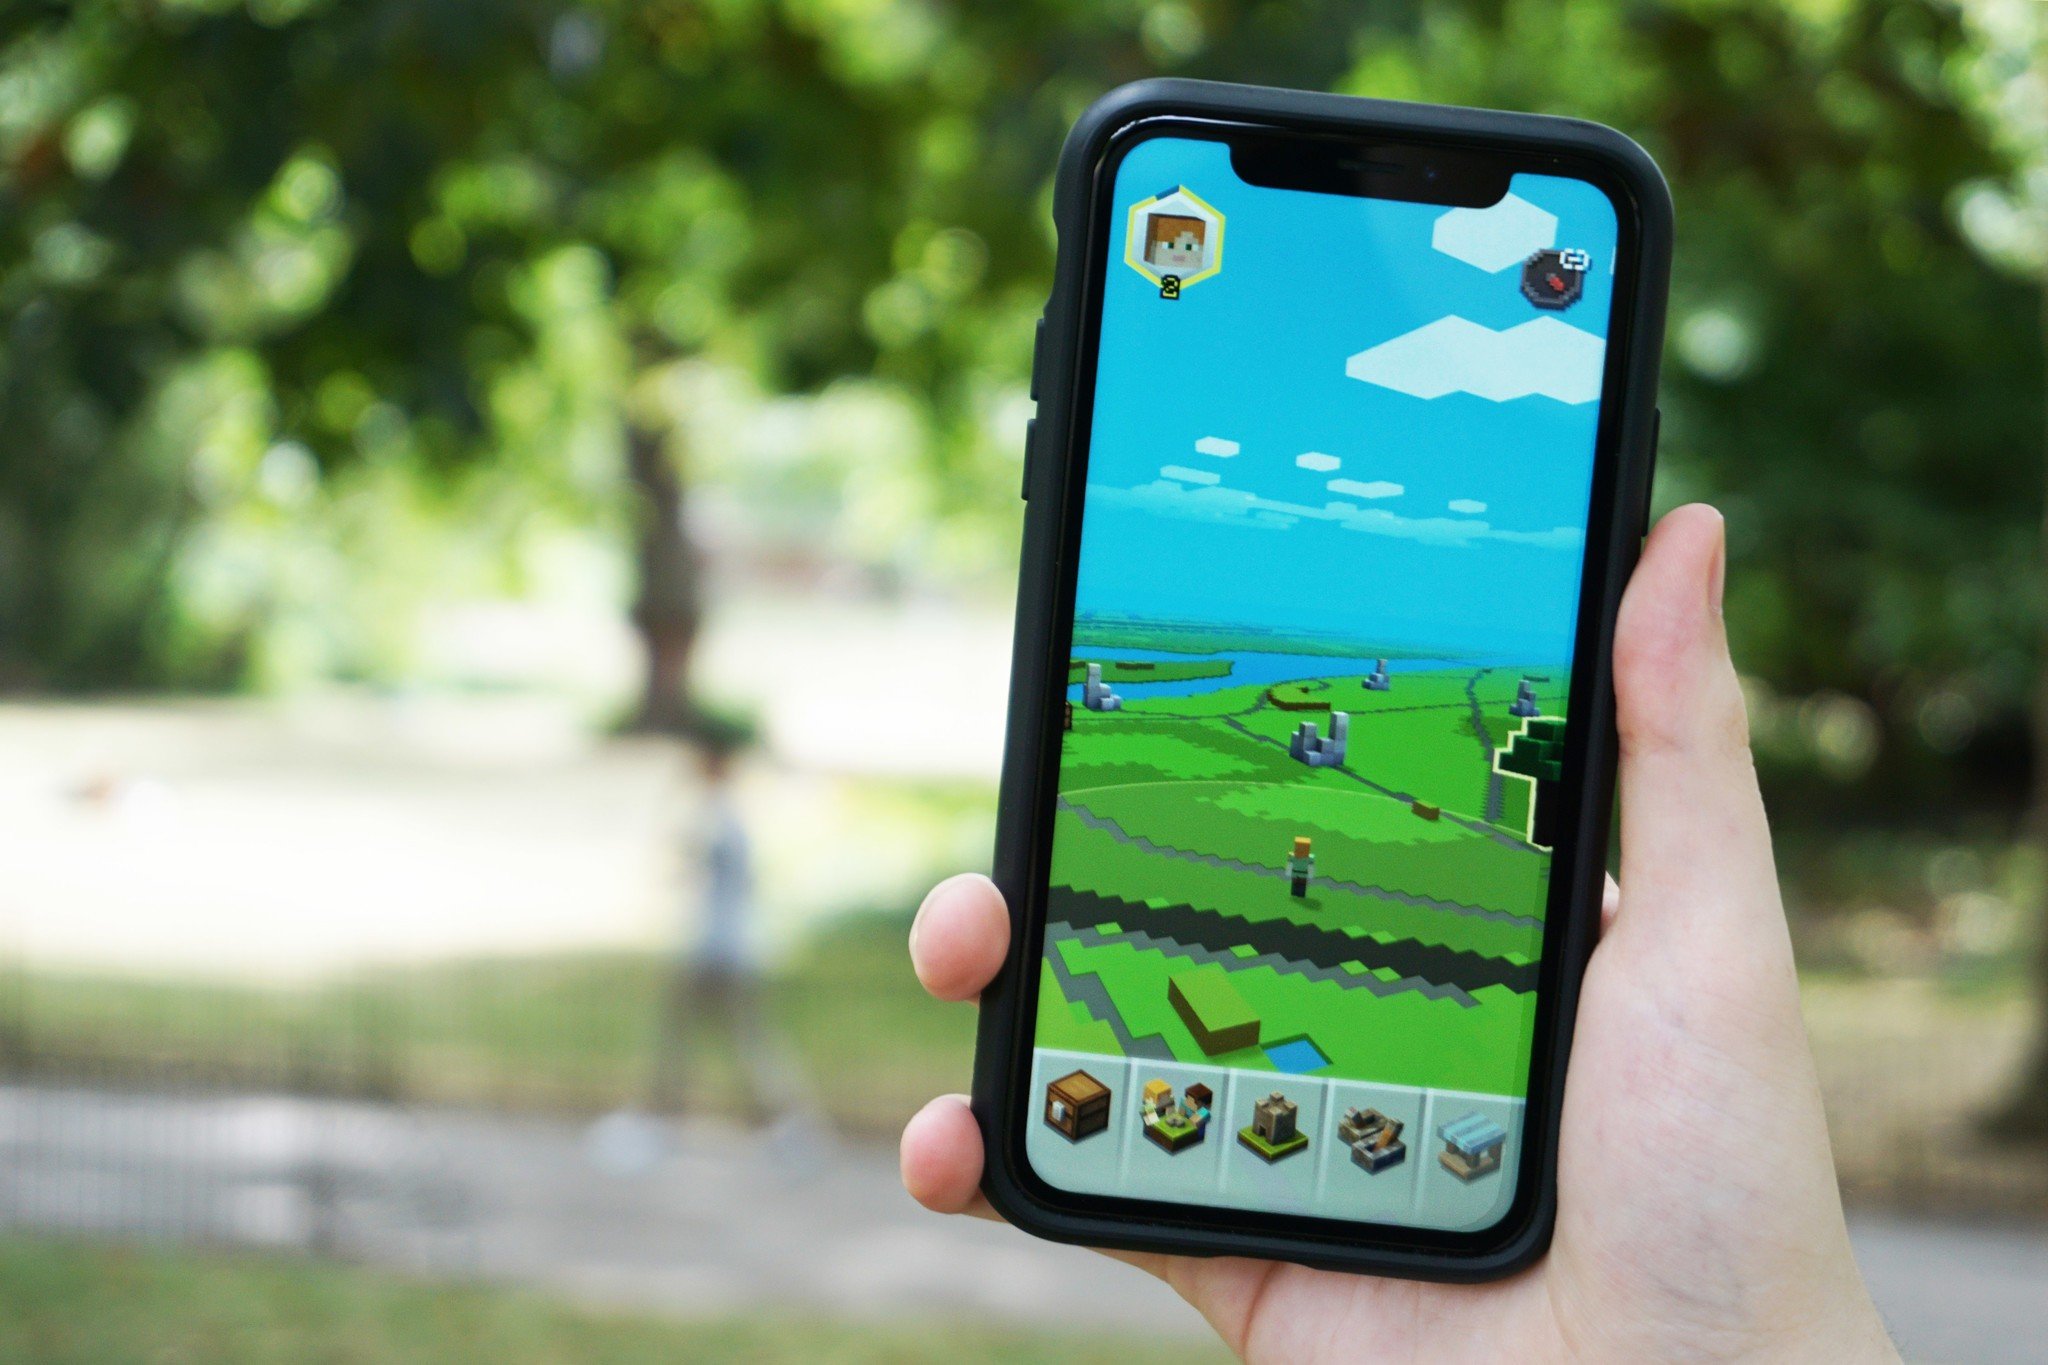 Minecraft Earth' is like 'Pokemon Go' for smartphone owners